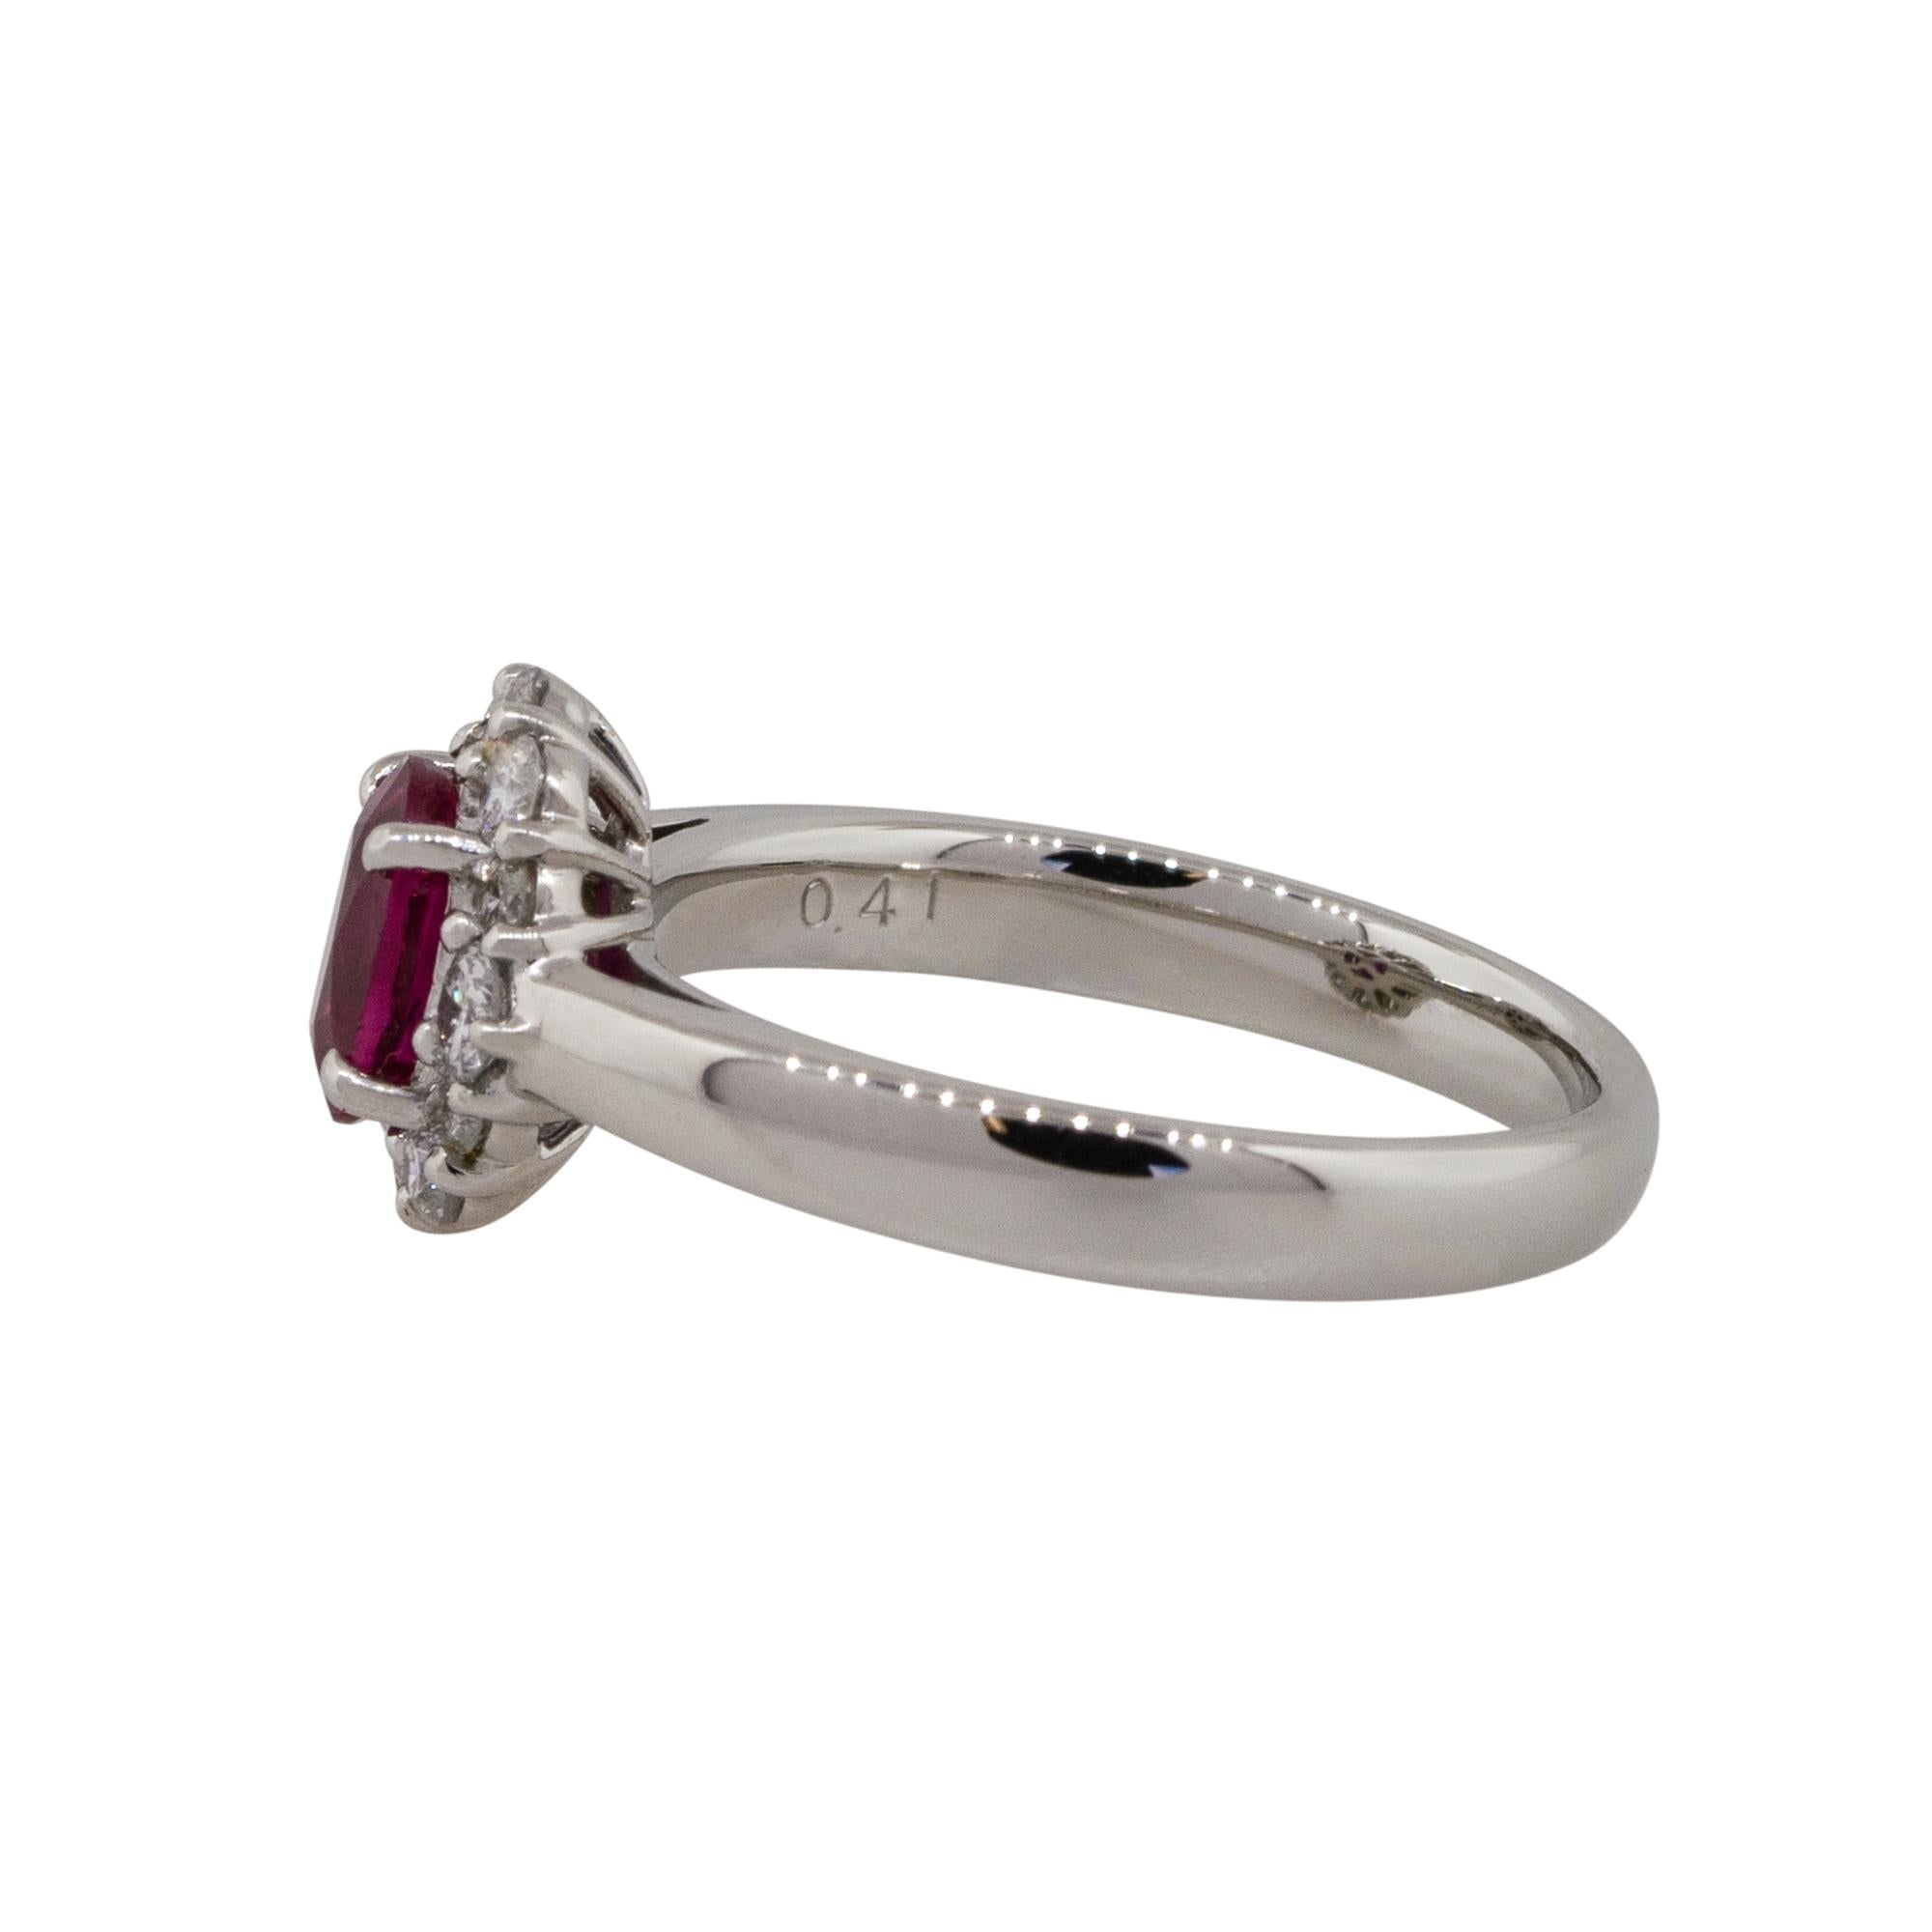 Oval Cut 1.12 Carat Oval Ruby Center Diamond Halo Ring Platinum in Stock